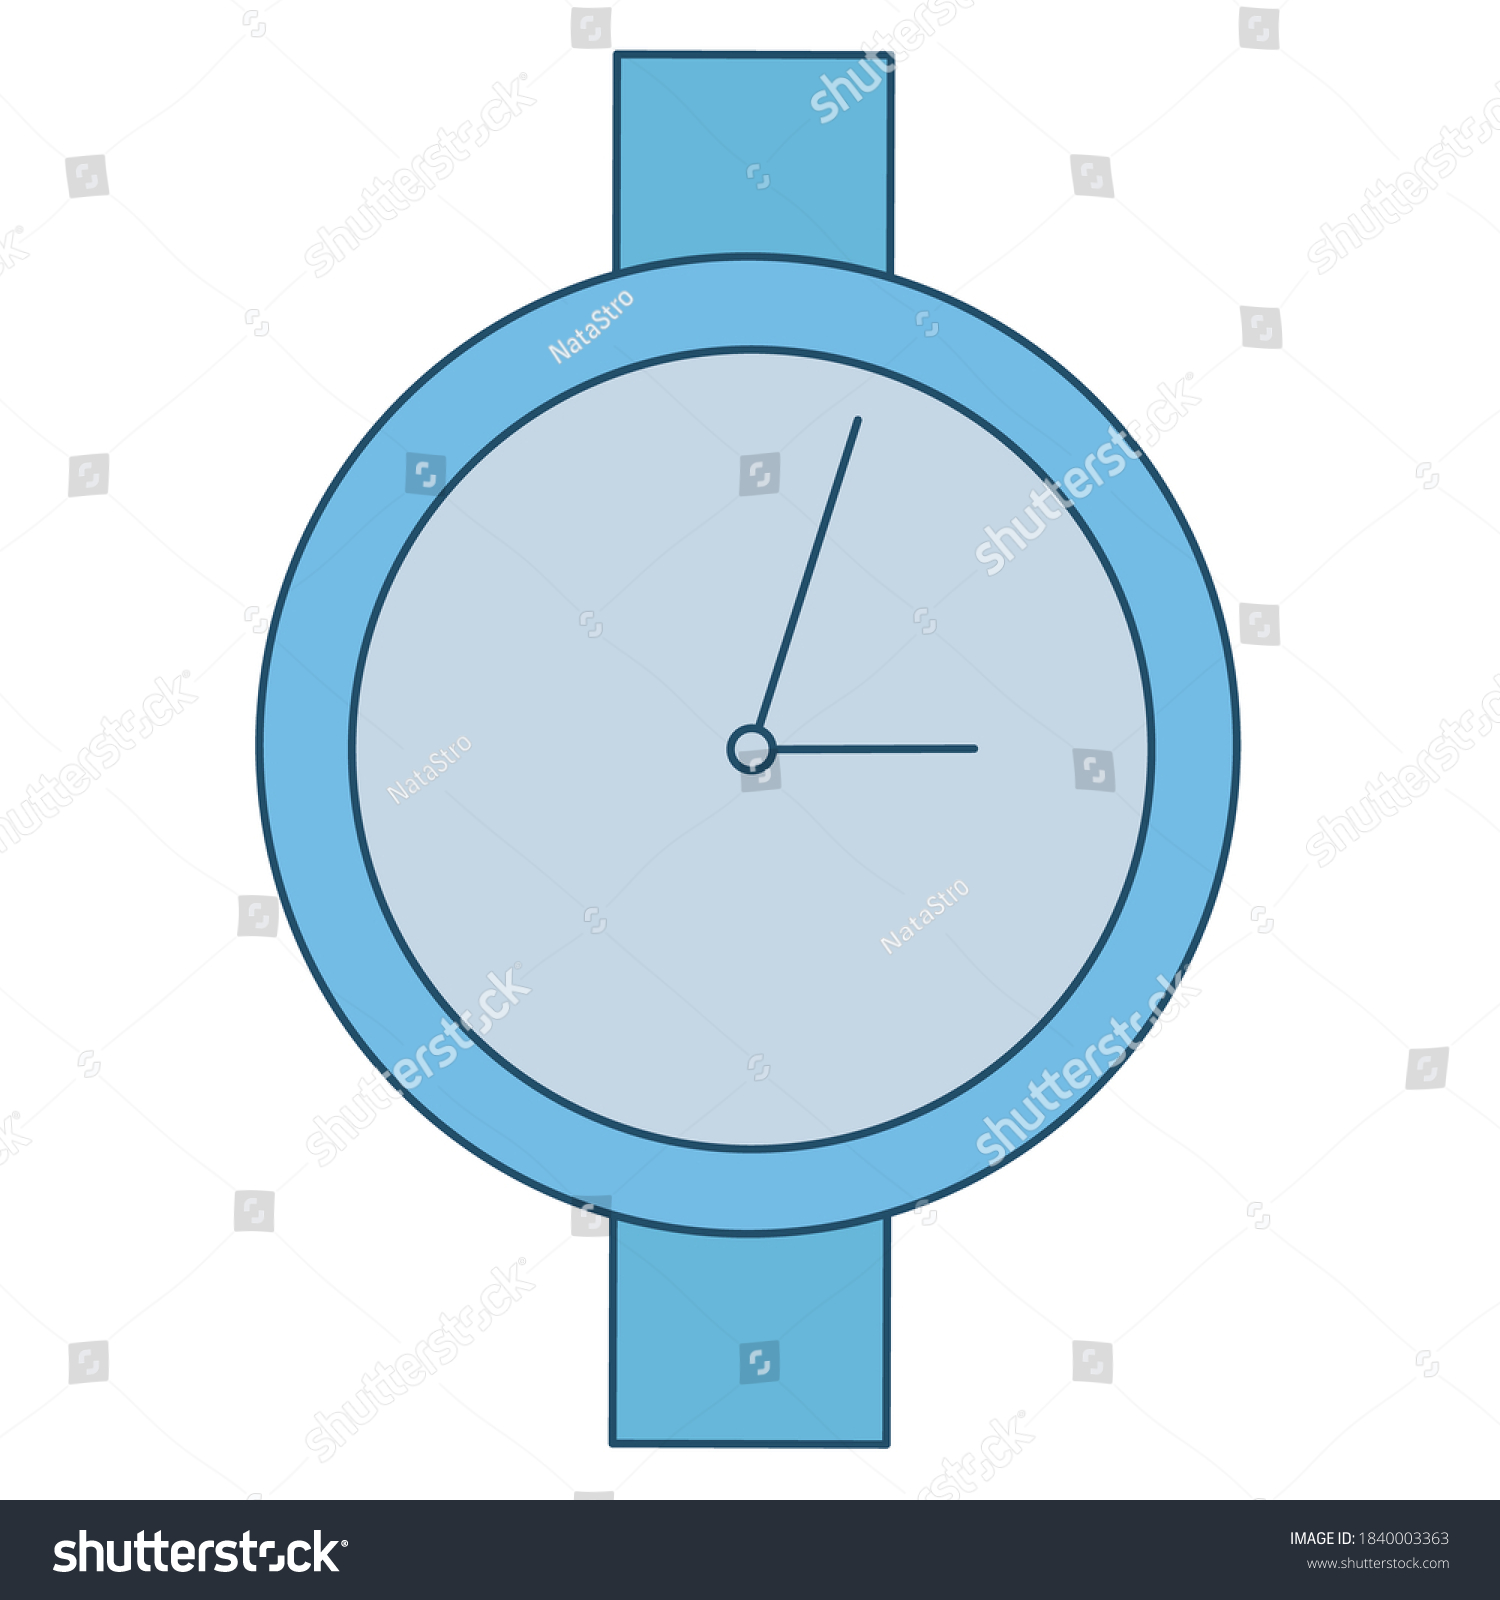 SVG of Watch colored vector icon isolated on white background. Blue circular wrist watch symbol. Beautiful clock with hands showing time. Clipart for app, web design, bujo sticker, settings, notifications svg